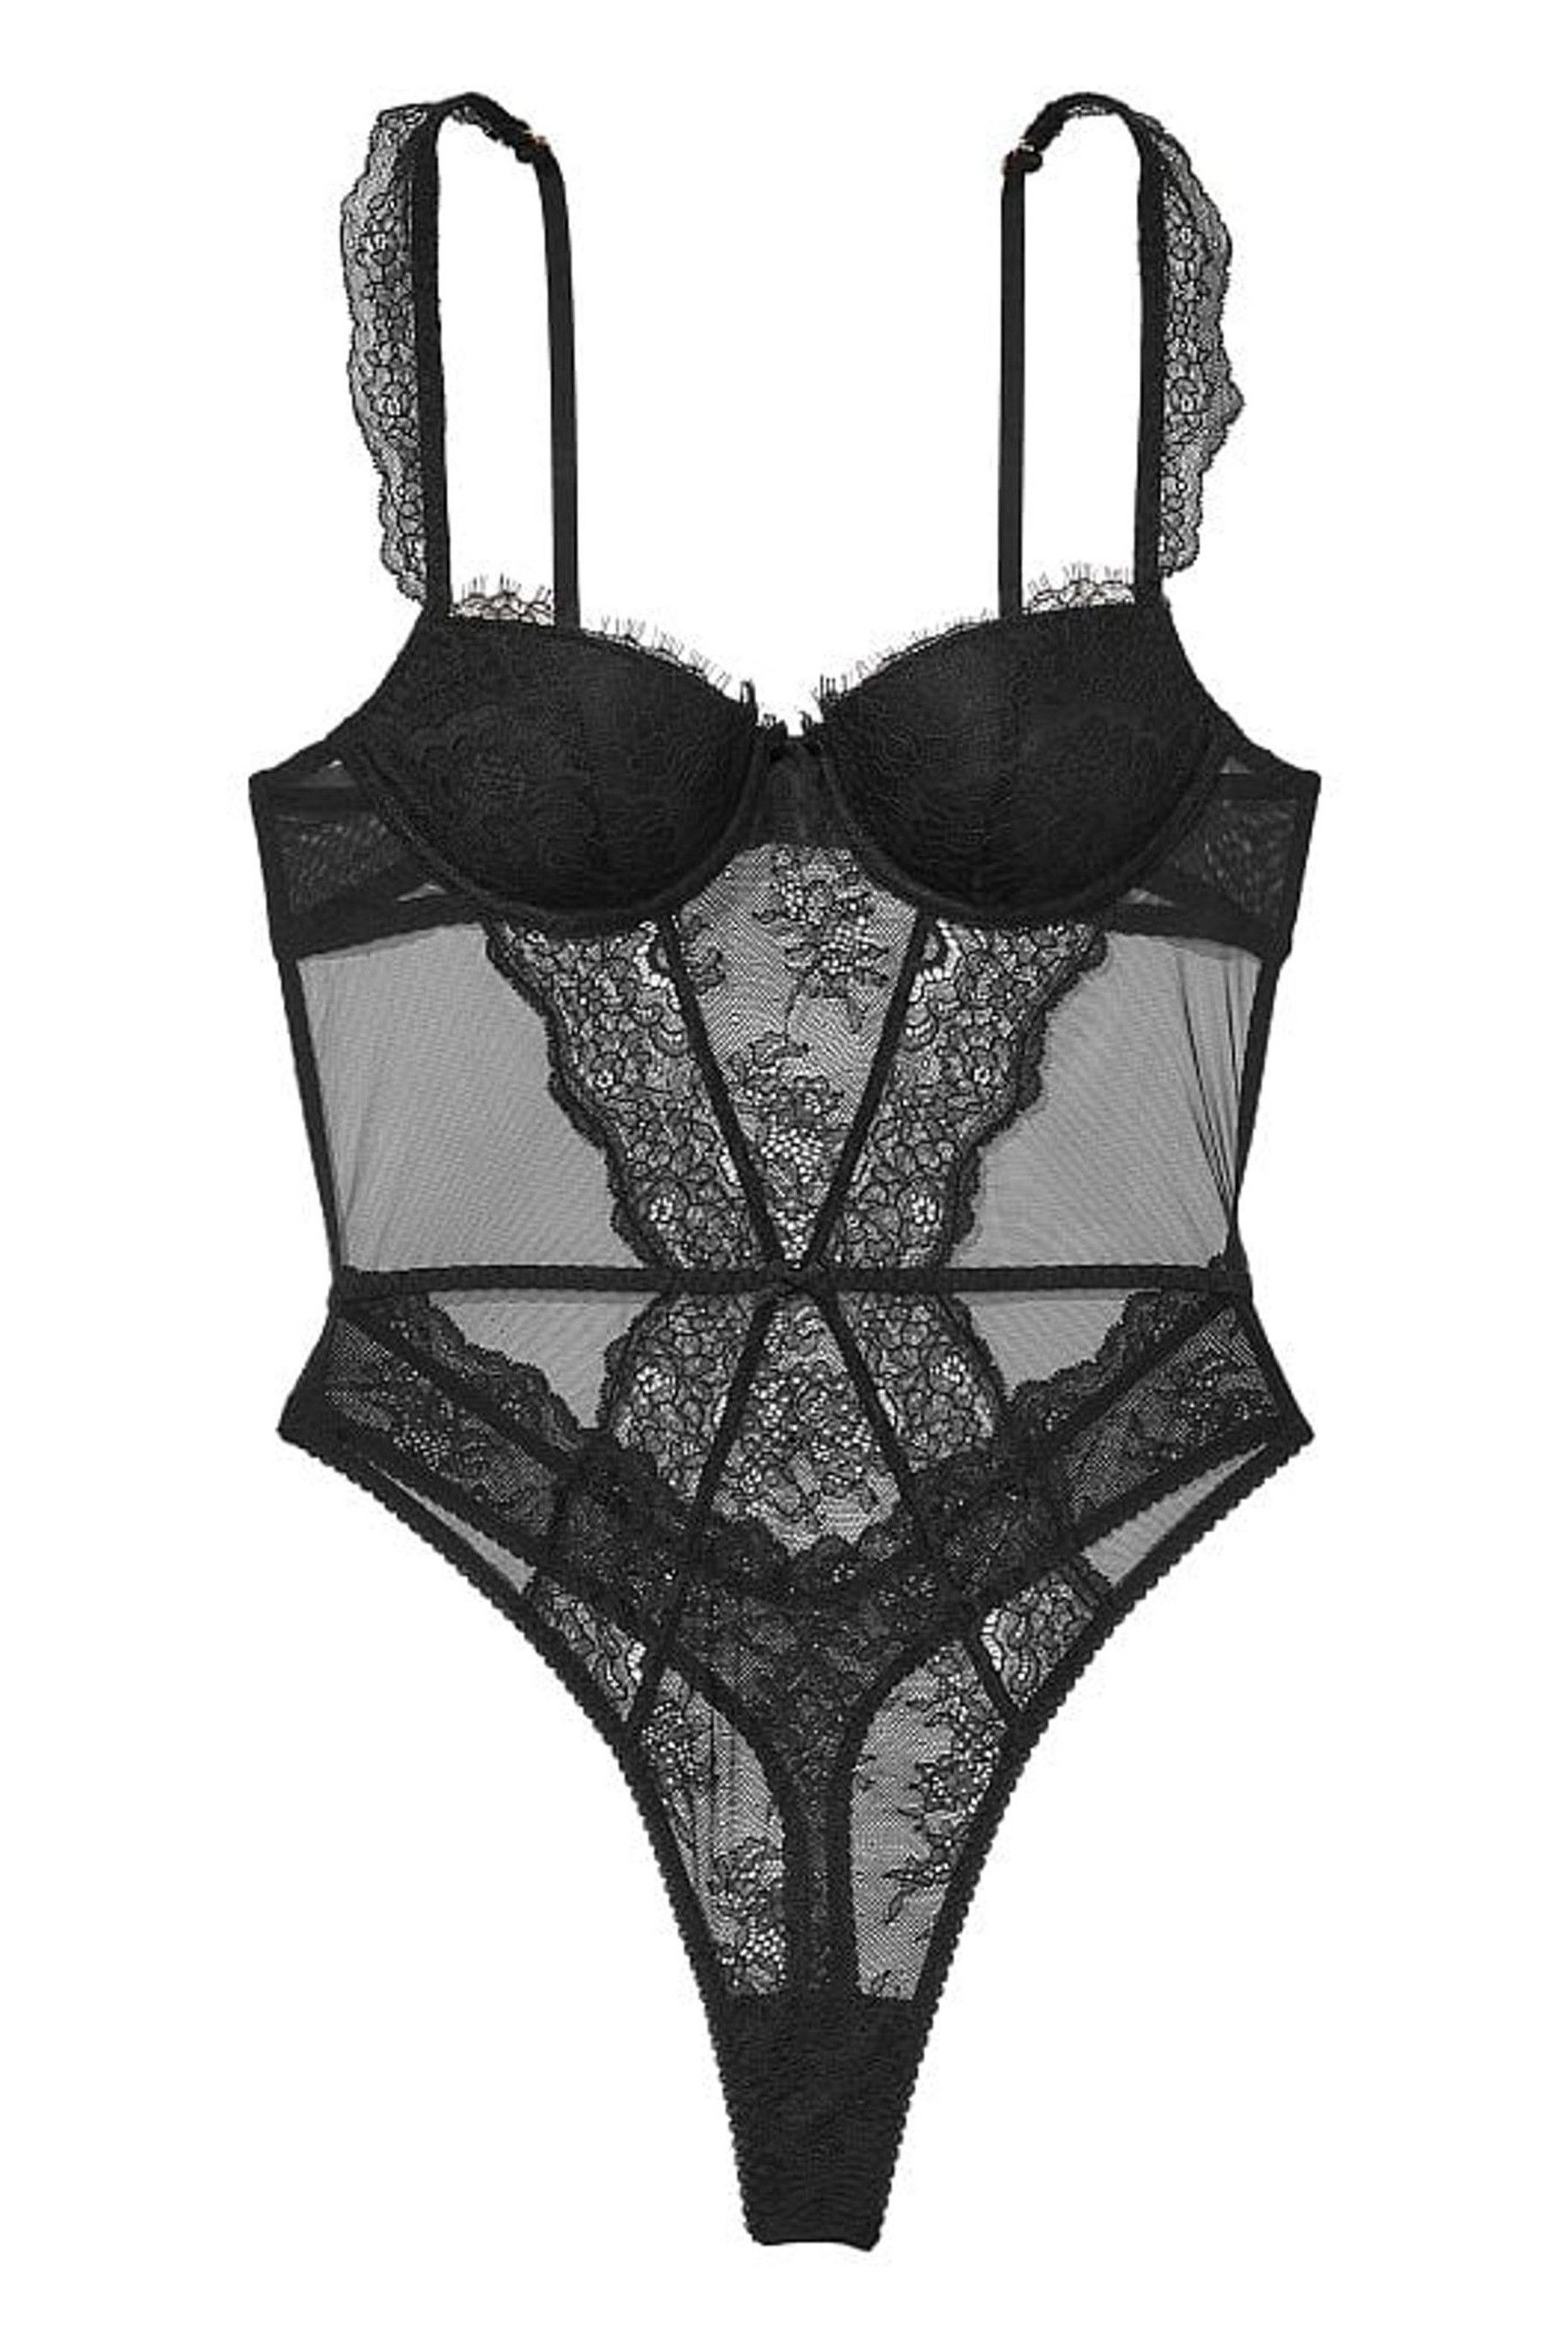 Buy Victoria's Secret Lightly Lined Demi Lace Bodysuit from the ...